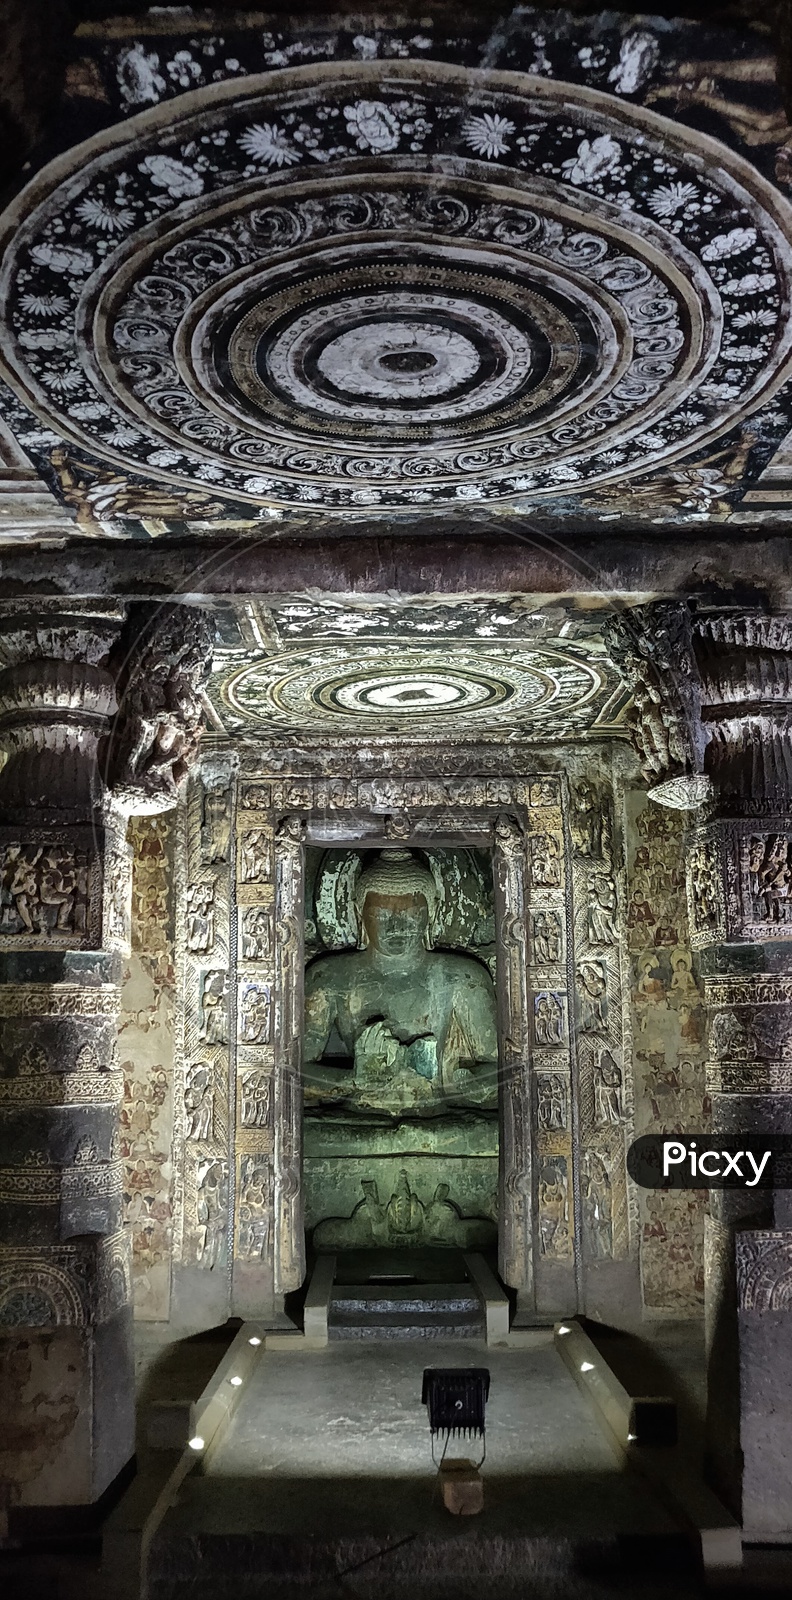 Ancient Stone Cravings With Architecture Of Buddha Temples   at Ajanta Caves    Or  Tourist Attraction Of  Ancient Caves At Ajanta in Deccan Plateau